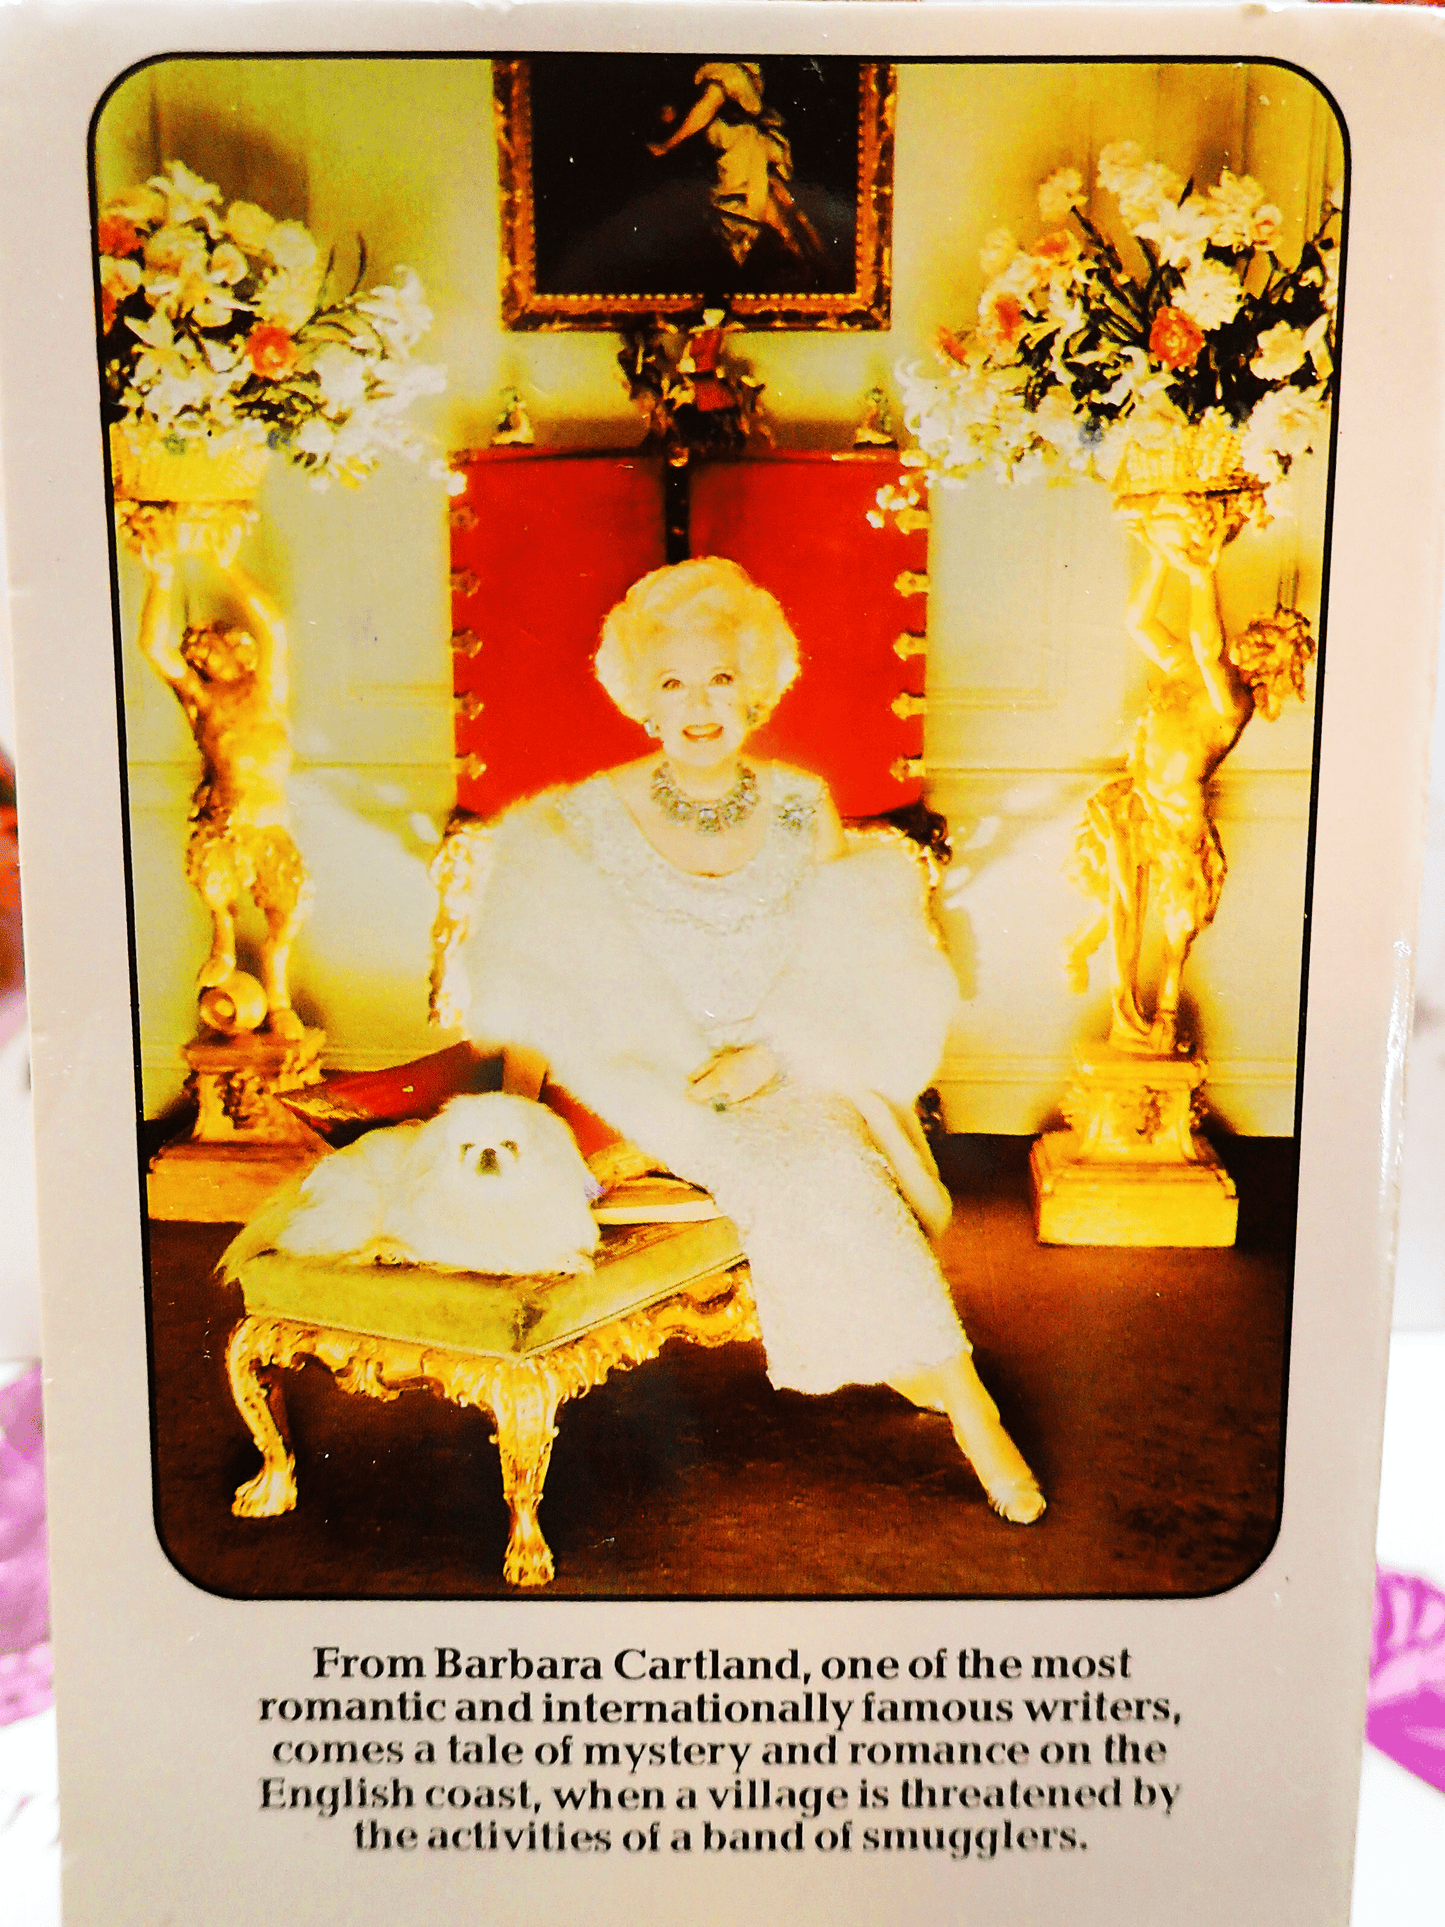 Back cover of Love and the Loathsome Leopard Barbara Cartland Corgi Paperback showing photo of the author.